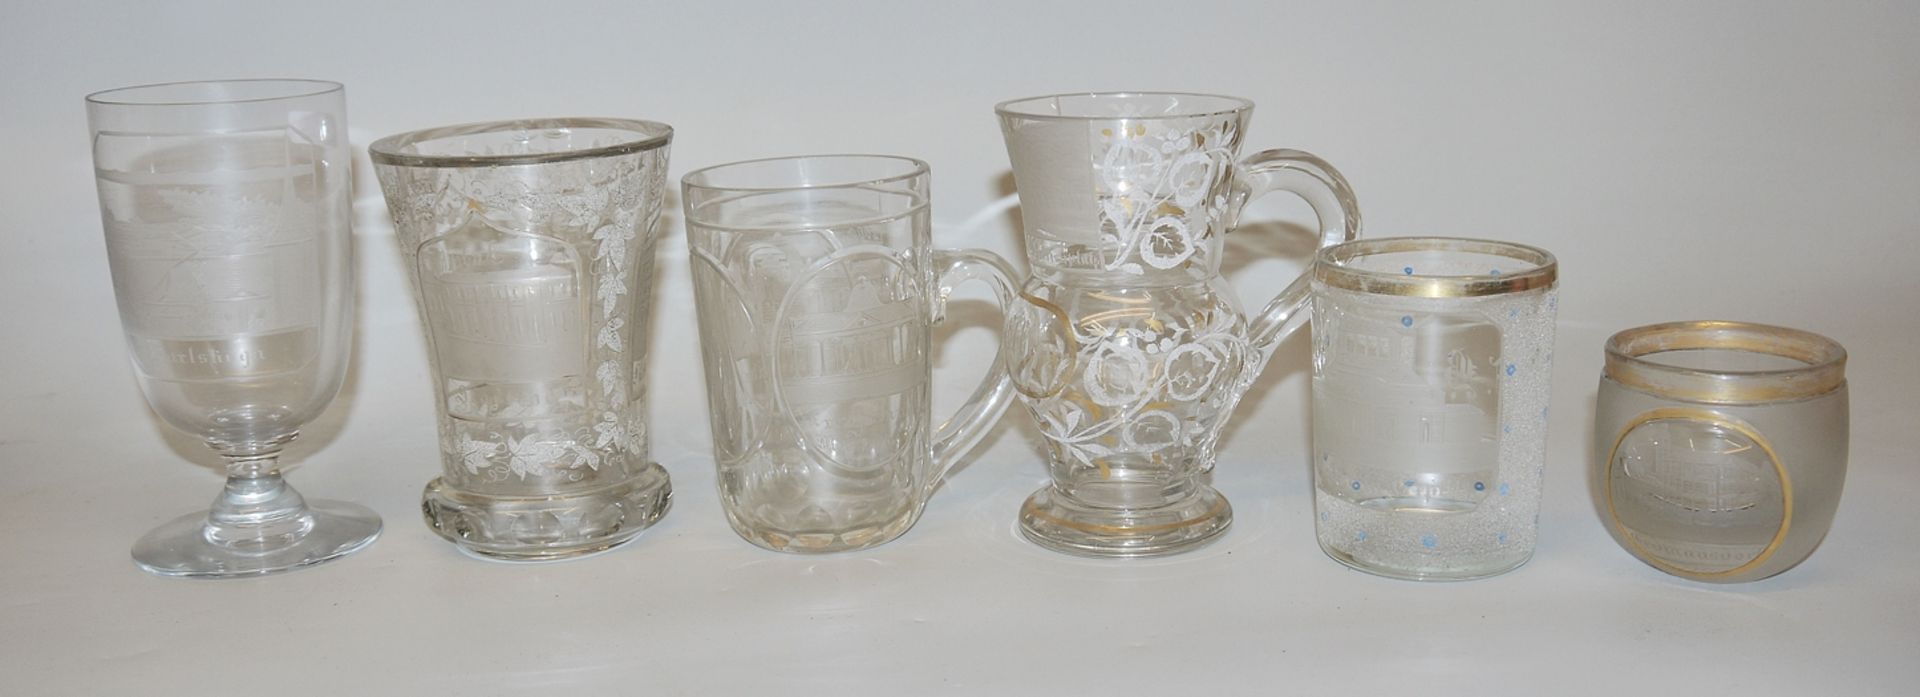 12 view and spa glasses, Bohemia, 1840-80 - Image 3 of 3